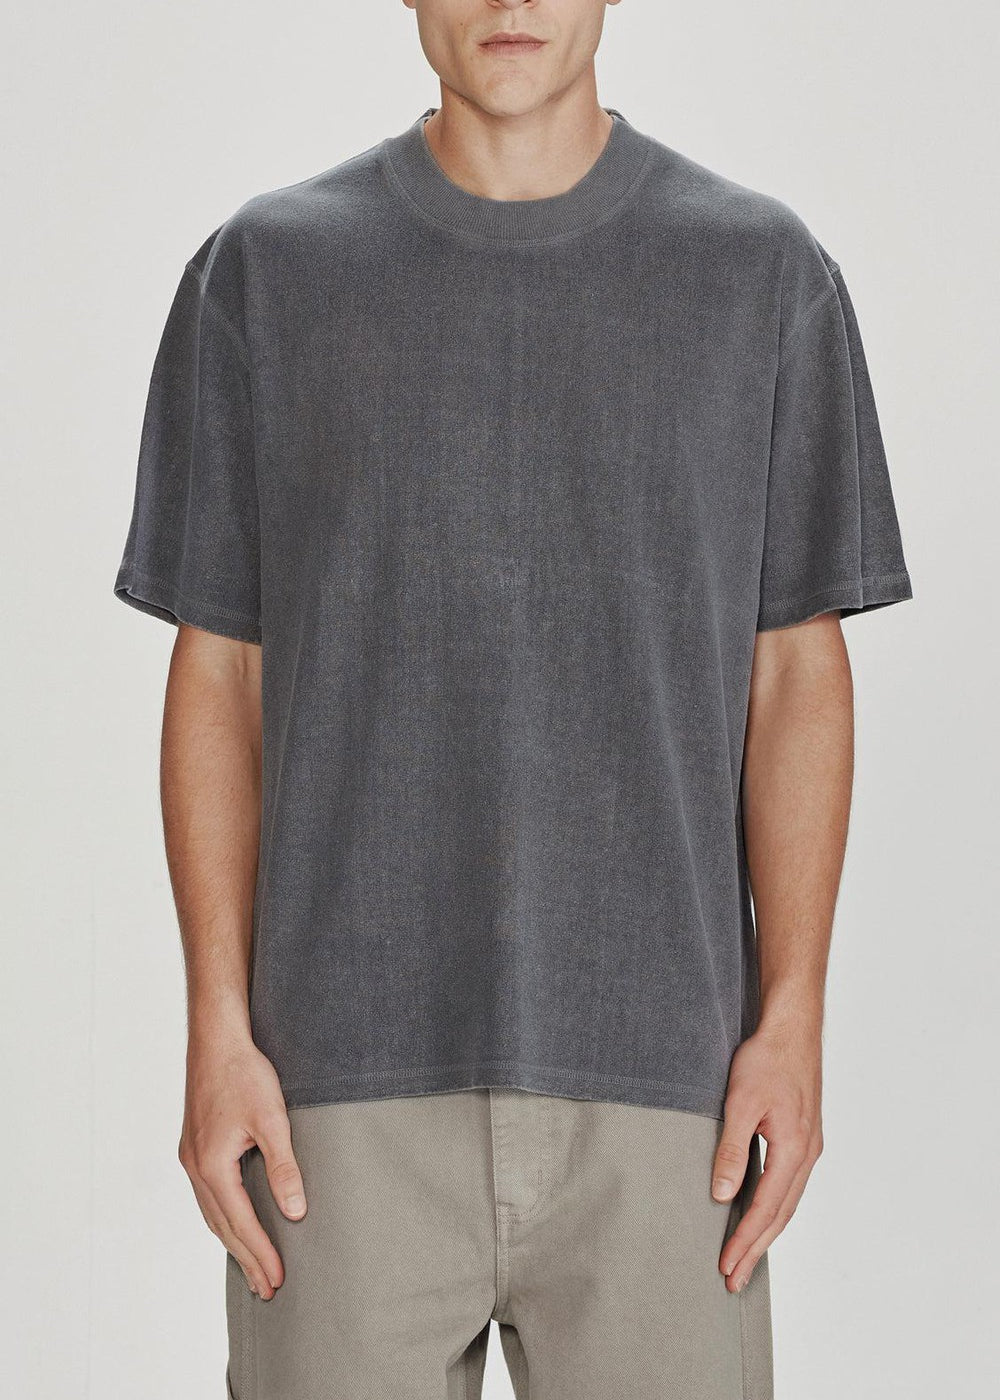 Commoners Hemp Jersey SS Tee / Vintage River | COMMONERS | Mad About The Boy